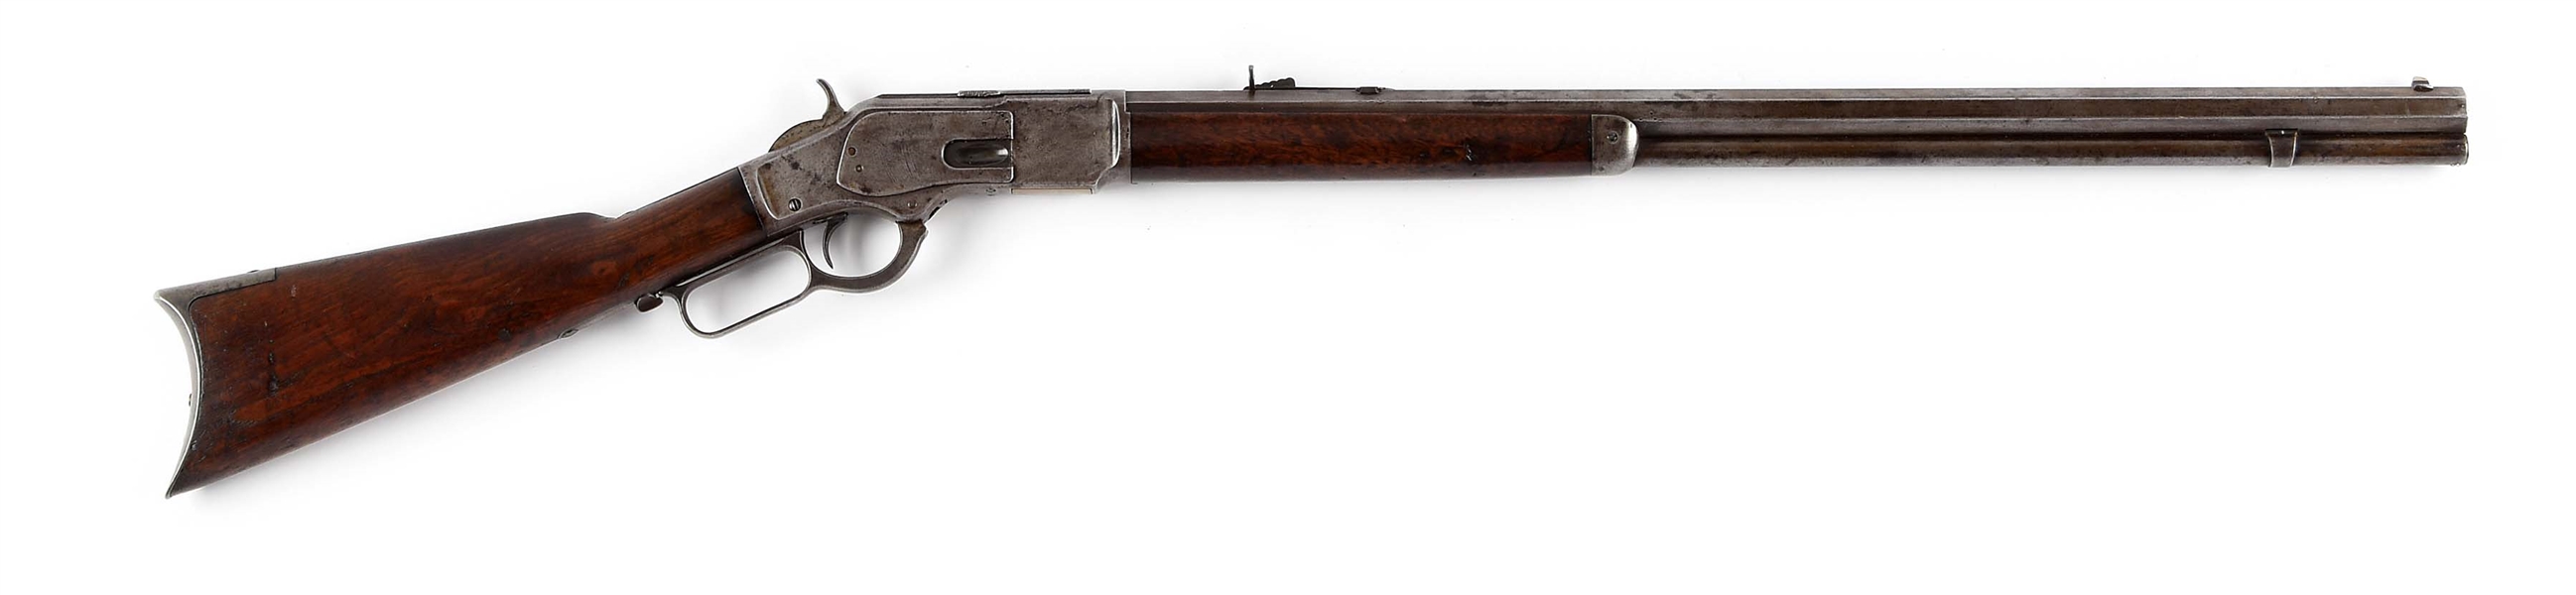 (A) SPECIAL ORDER WINCHESTER 1873 THIRD MODEL HEAVY BARRELED RIFLE.